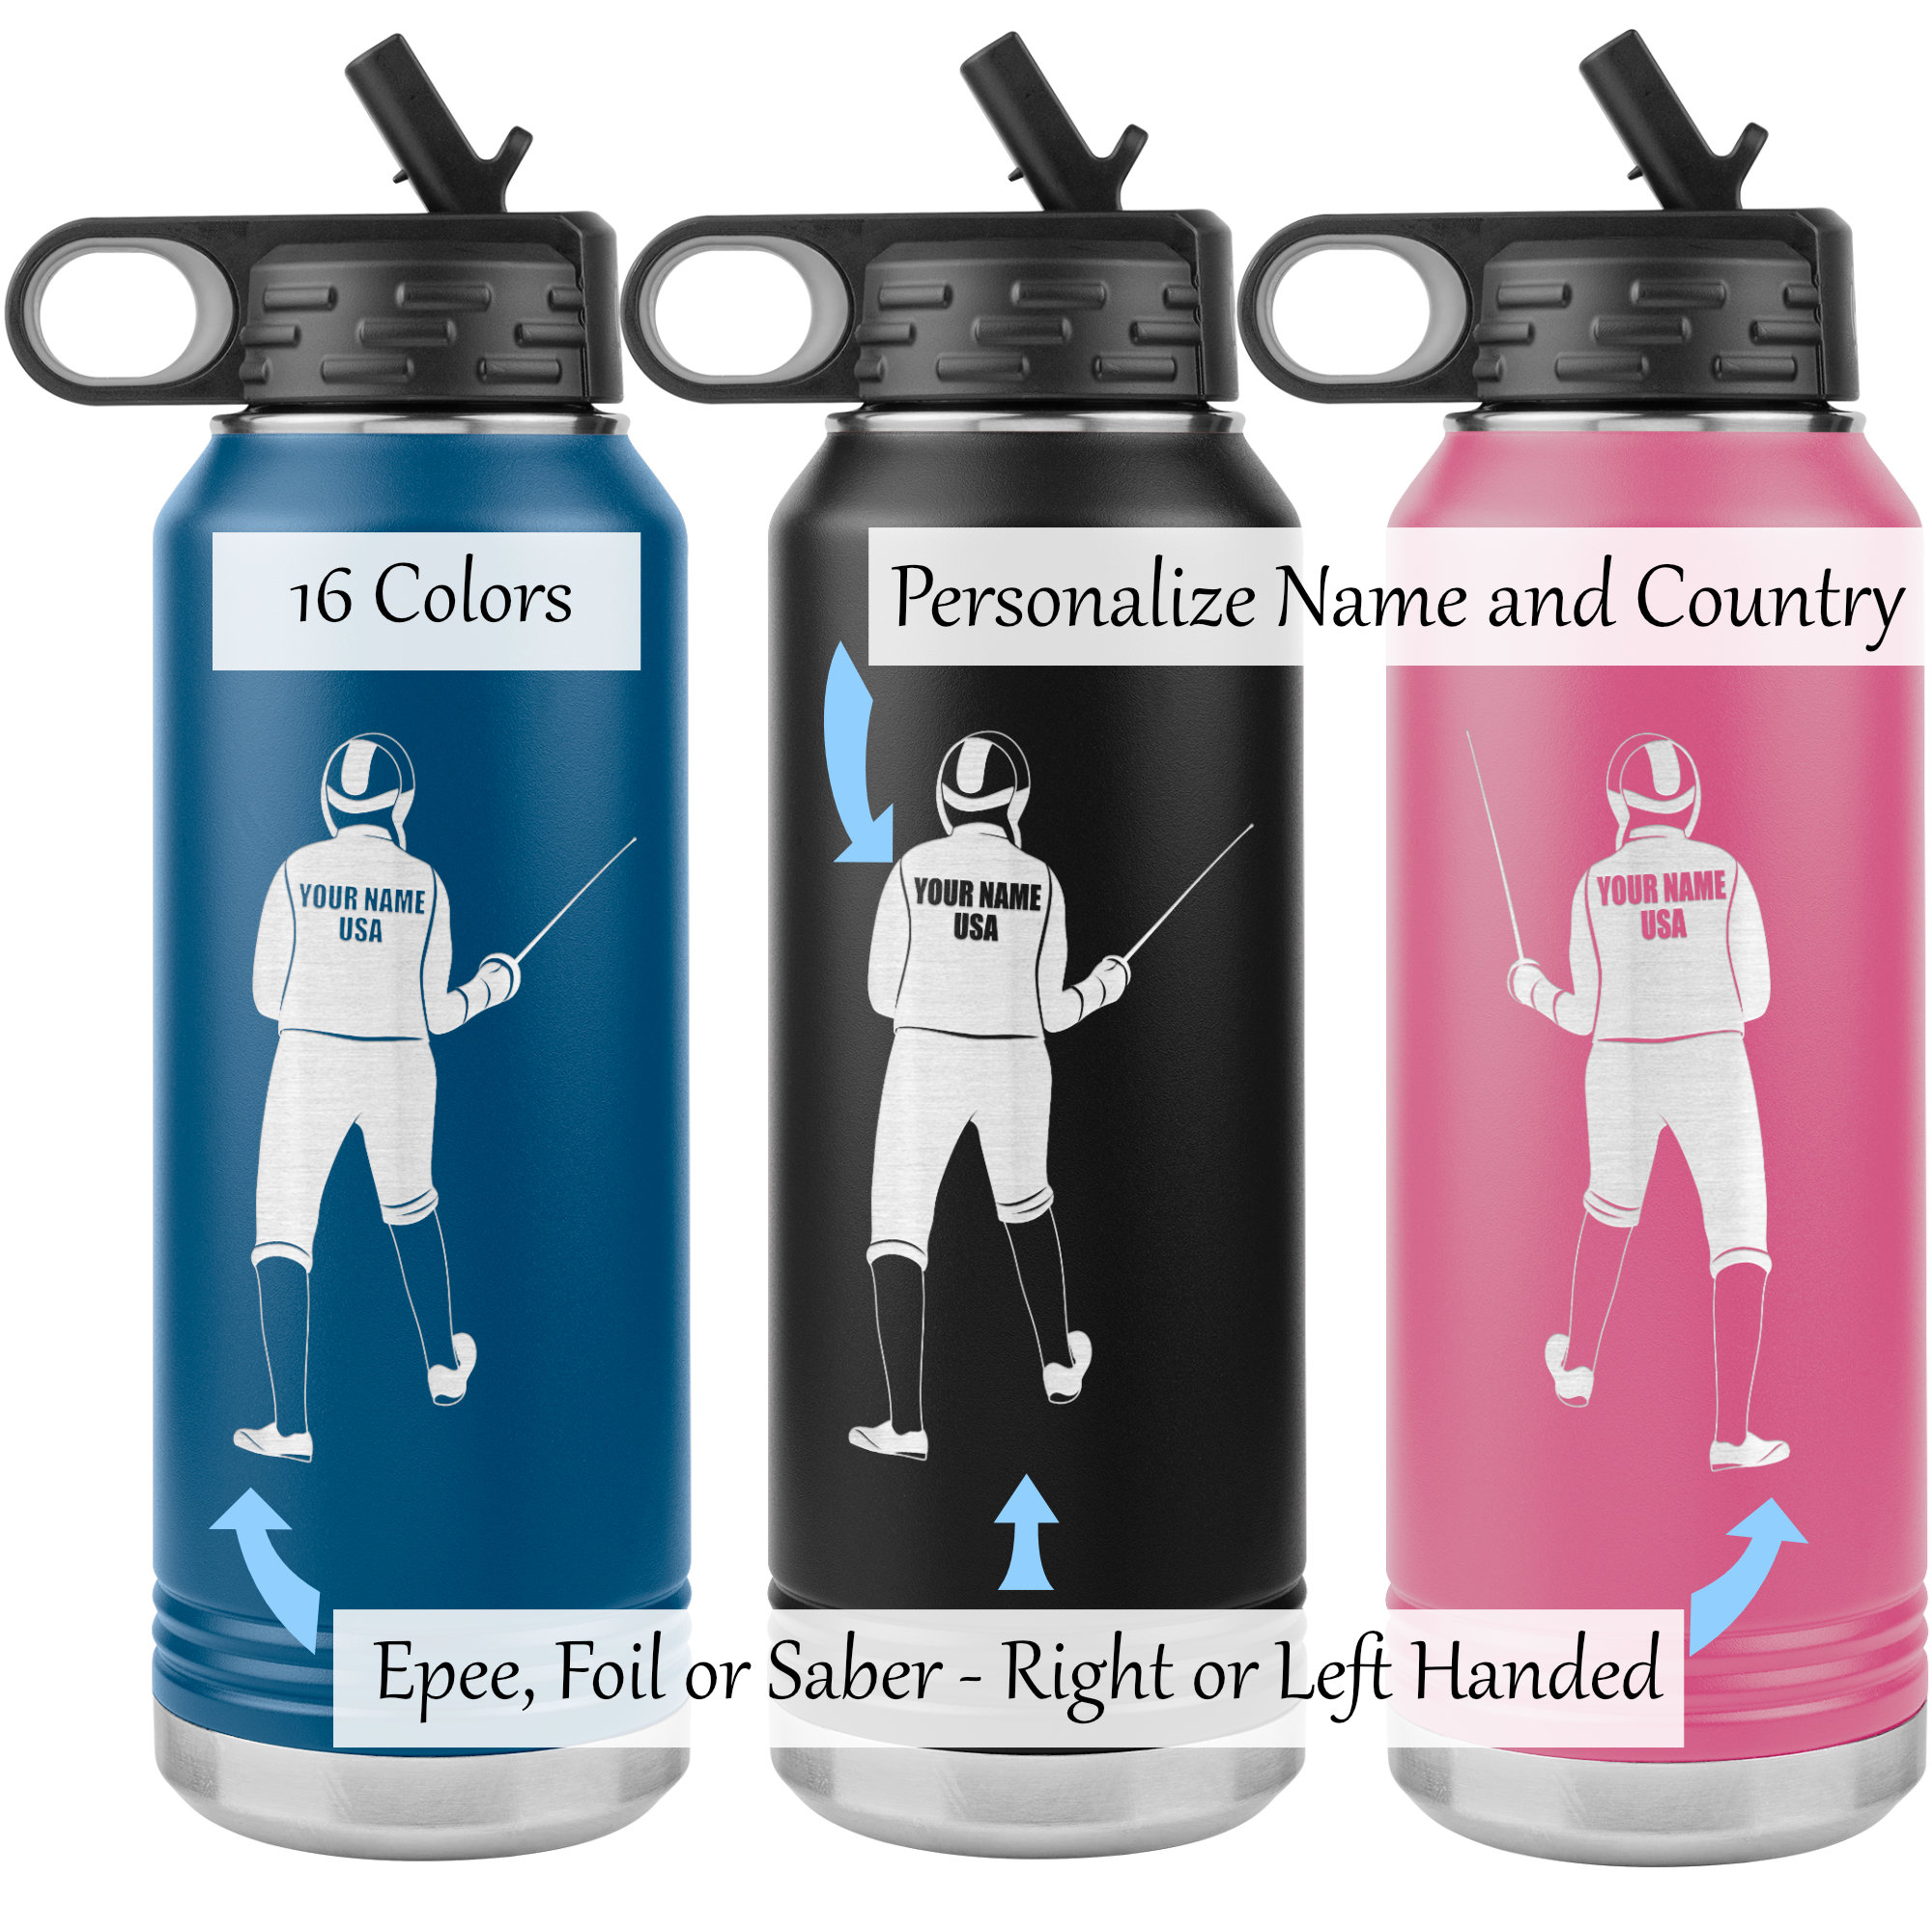 https://www.fencinglove.com/wp-content/uploads/2020/08/fencer-water-bottle-weapons-colors-choice-1.jpg